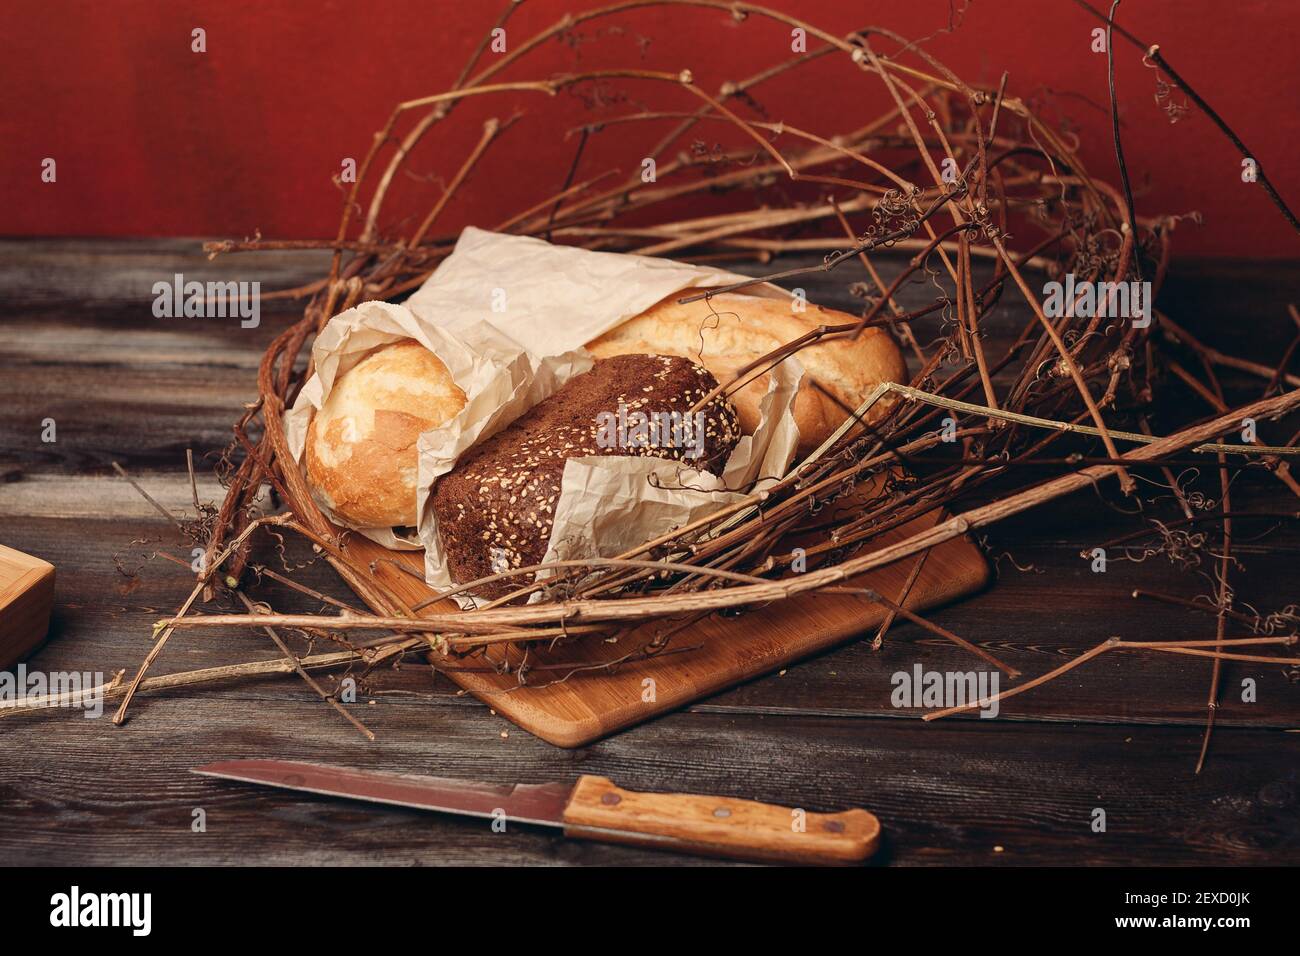 https://c8.alamy.com/comp/2EXD0JK/a-loaf-of-fresh-bread-flour-product-in-a-birds-nest-on-a-wooden-table-on-a-red-background-2EXD0JK.jpg